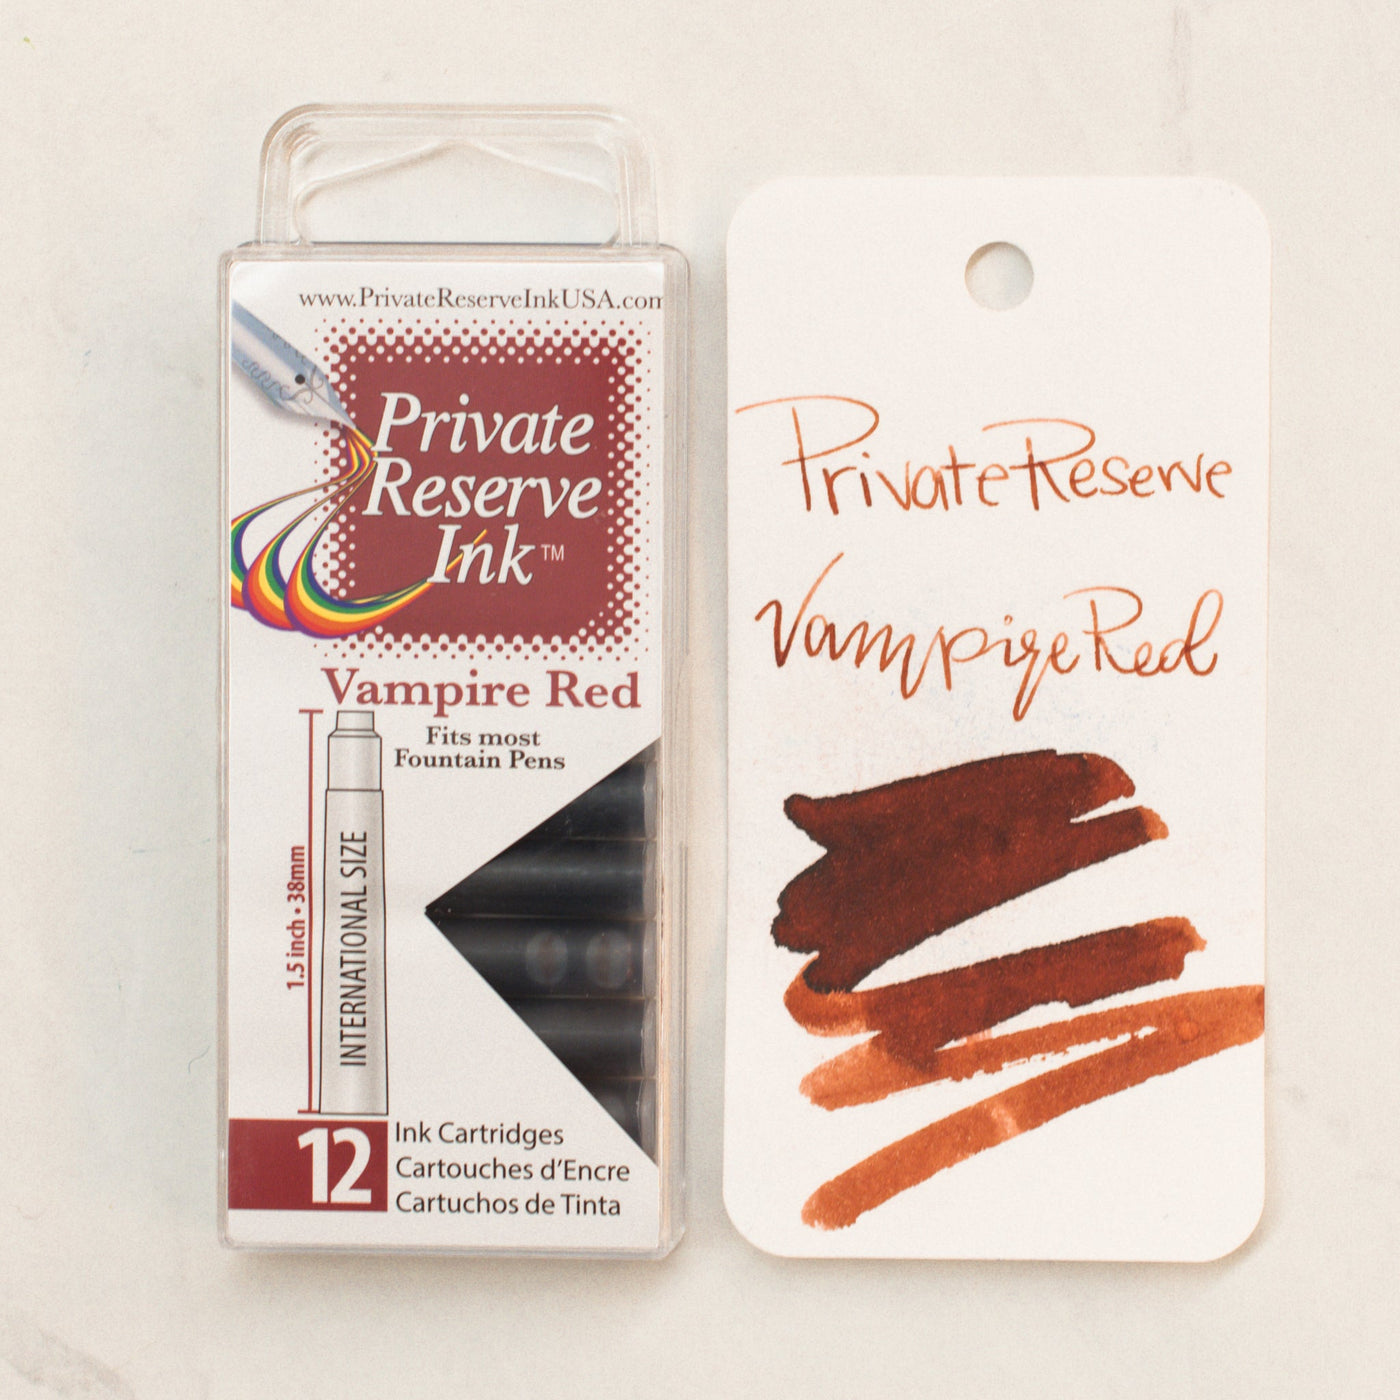 Private-Reserve-Vampire-Red-Ink-Cartridges